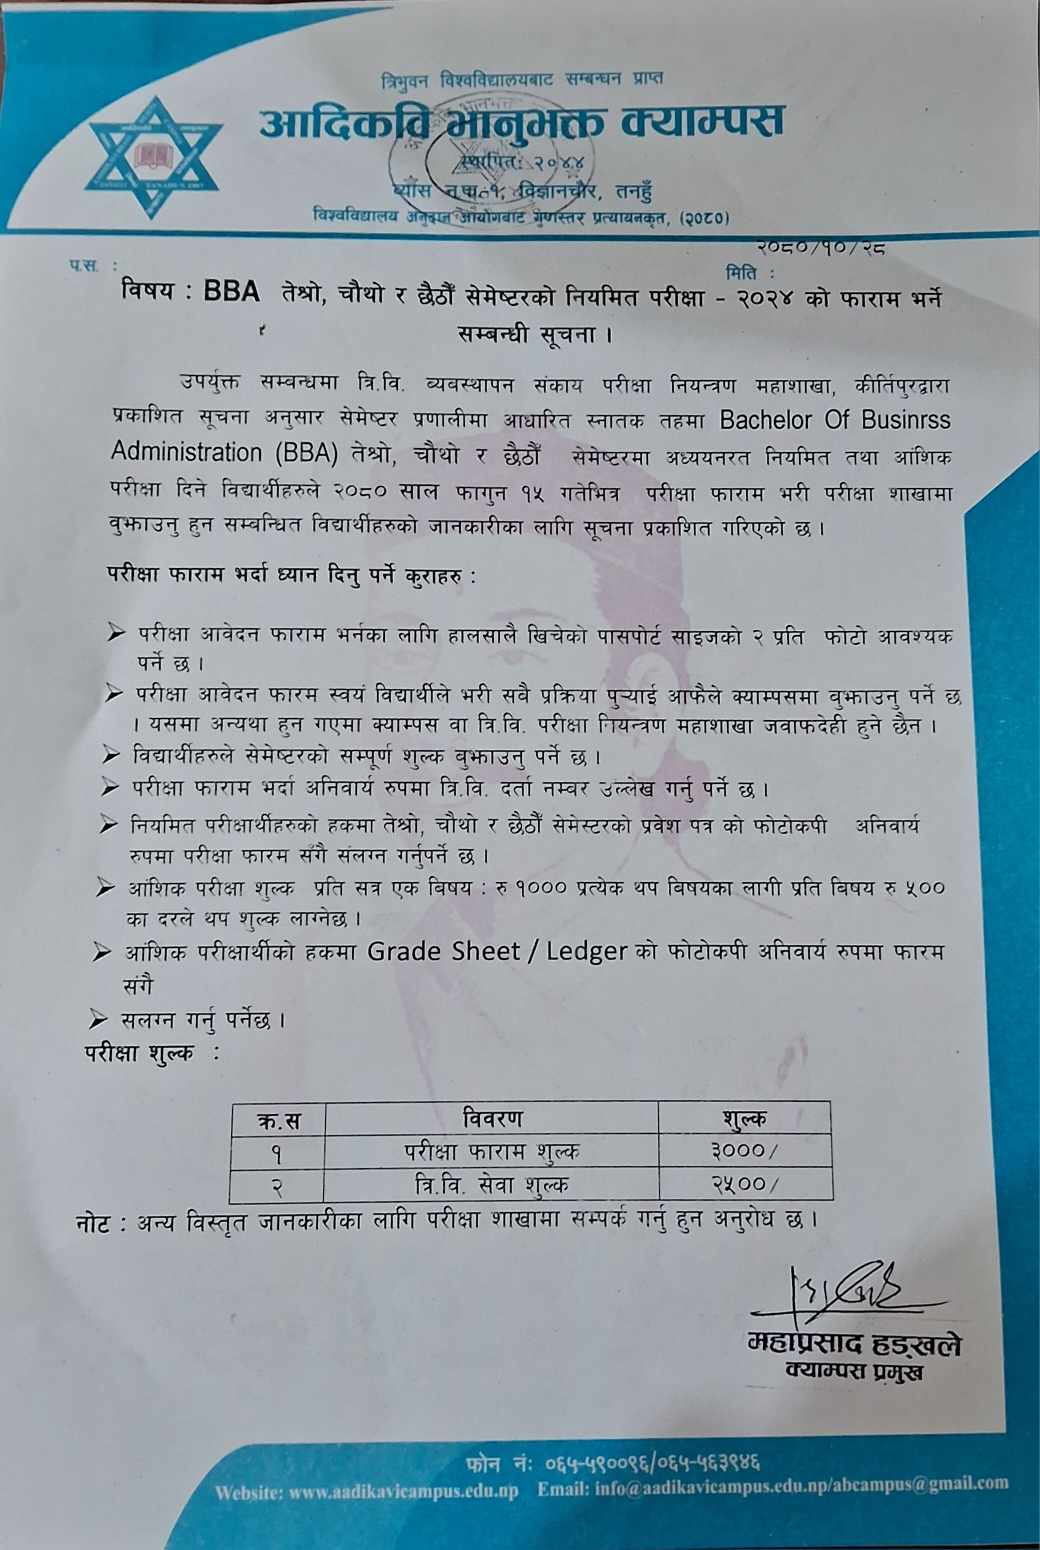 BBA  3RD, 4TH AND 6TH SEMESTER EXAM NOTICE